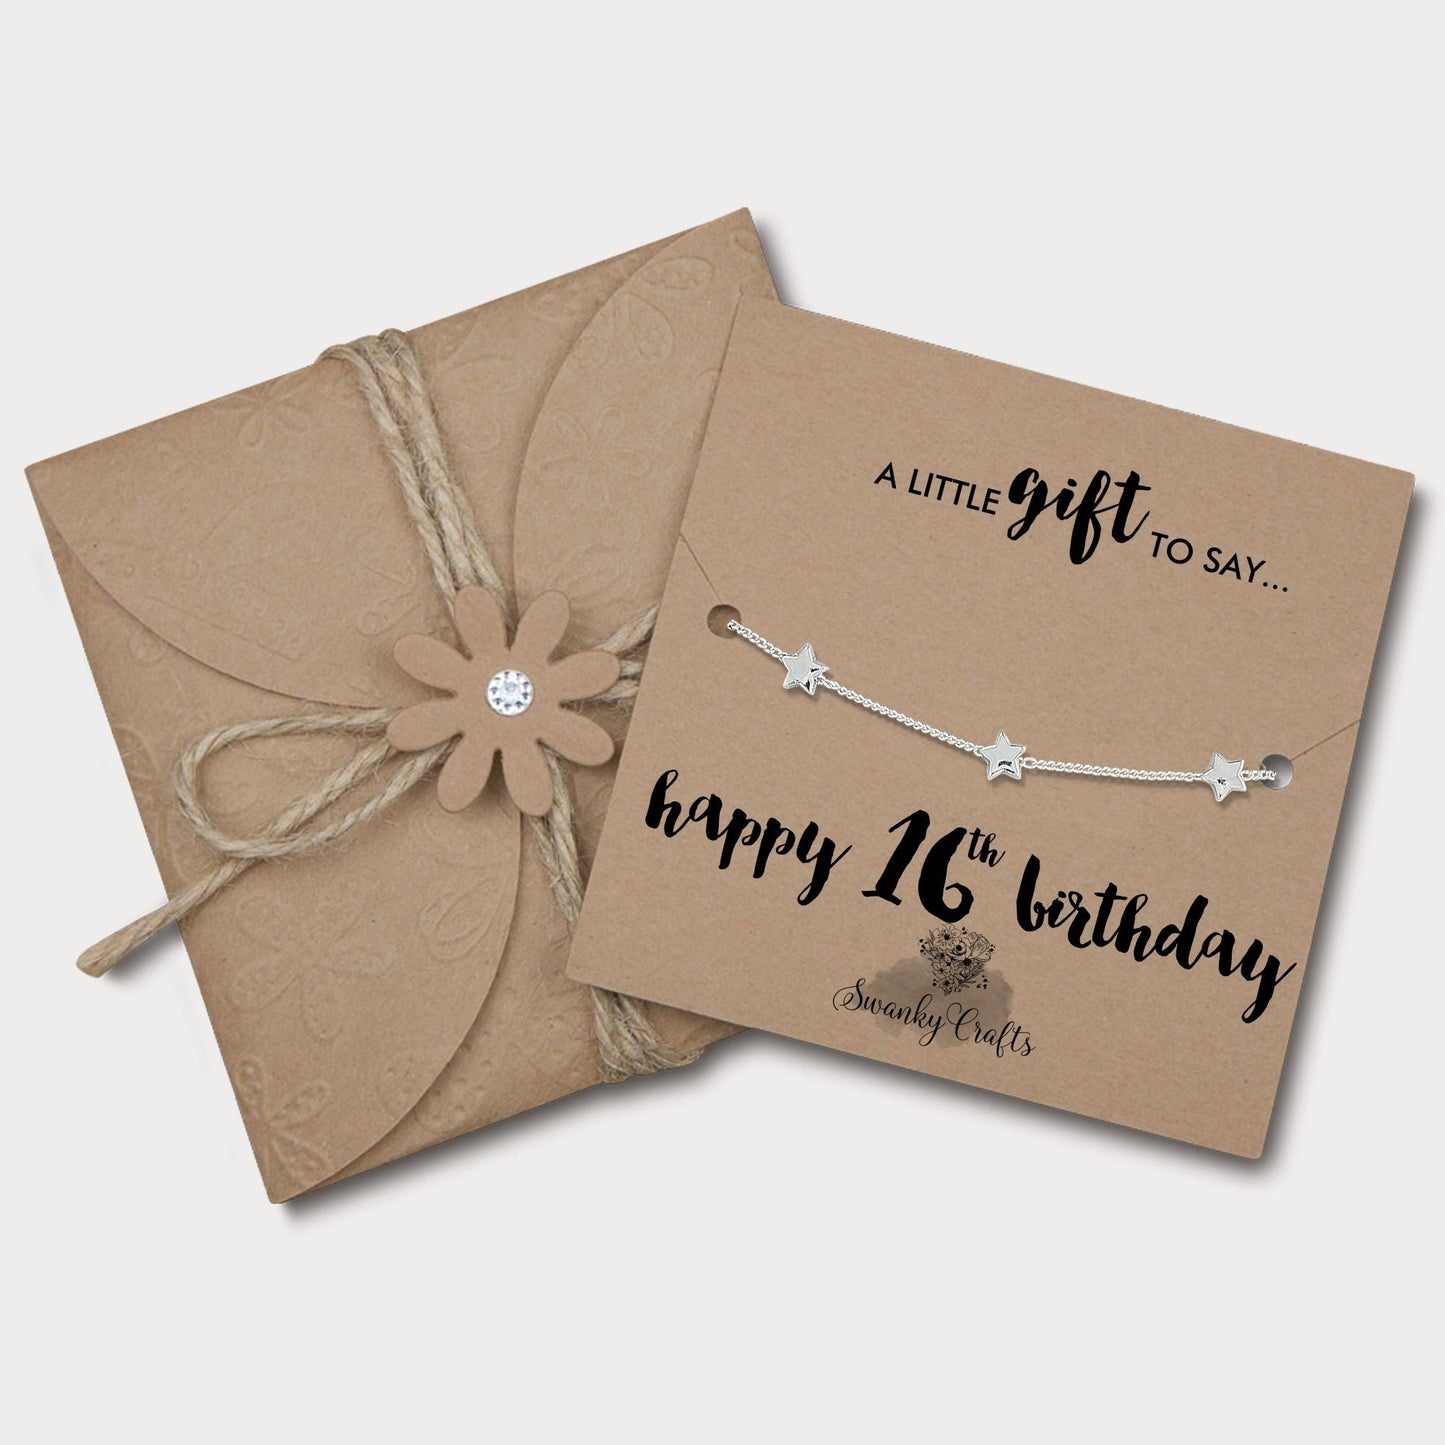 30th Birthday Gift - 18ct Gold Star Bracelet with Card and Gift Wrap